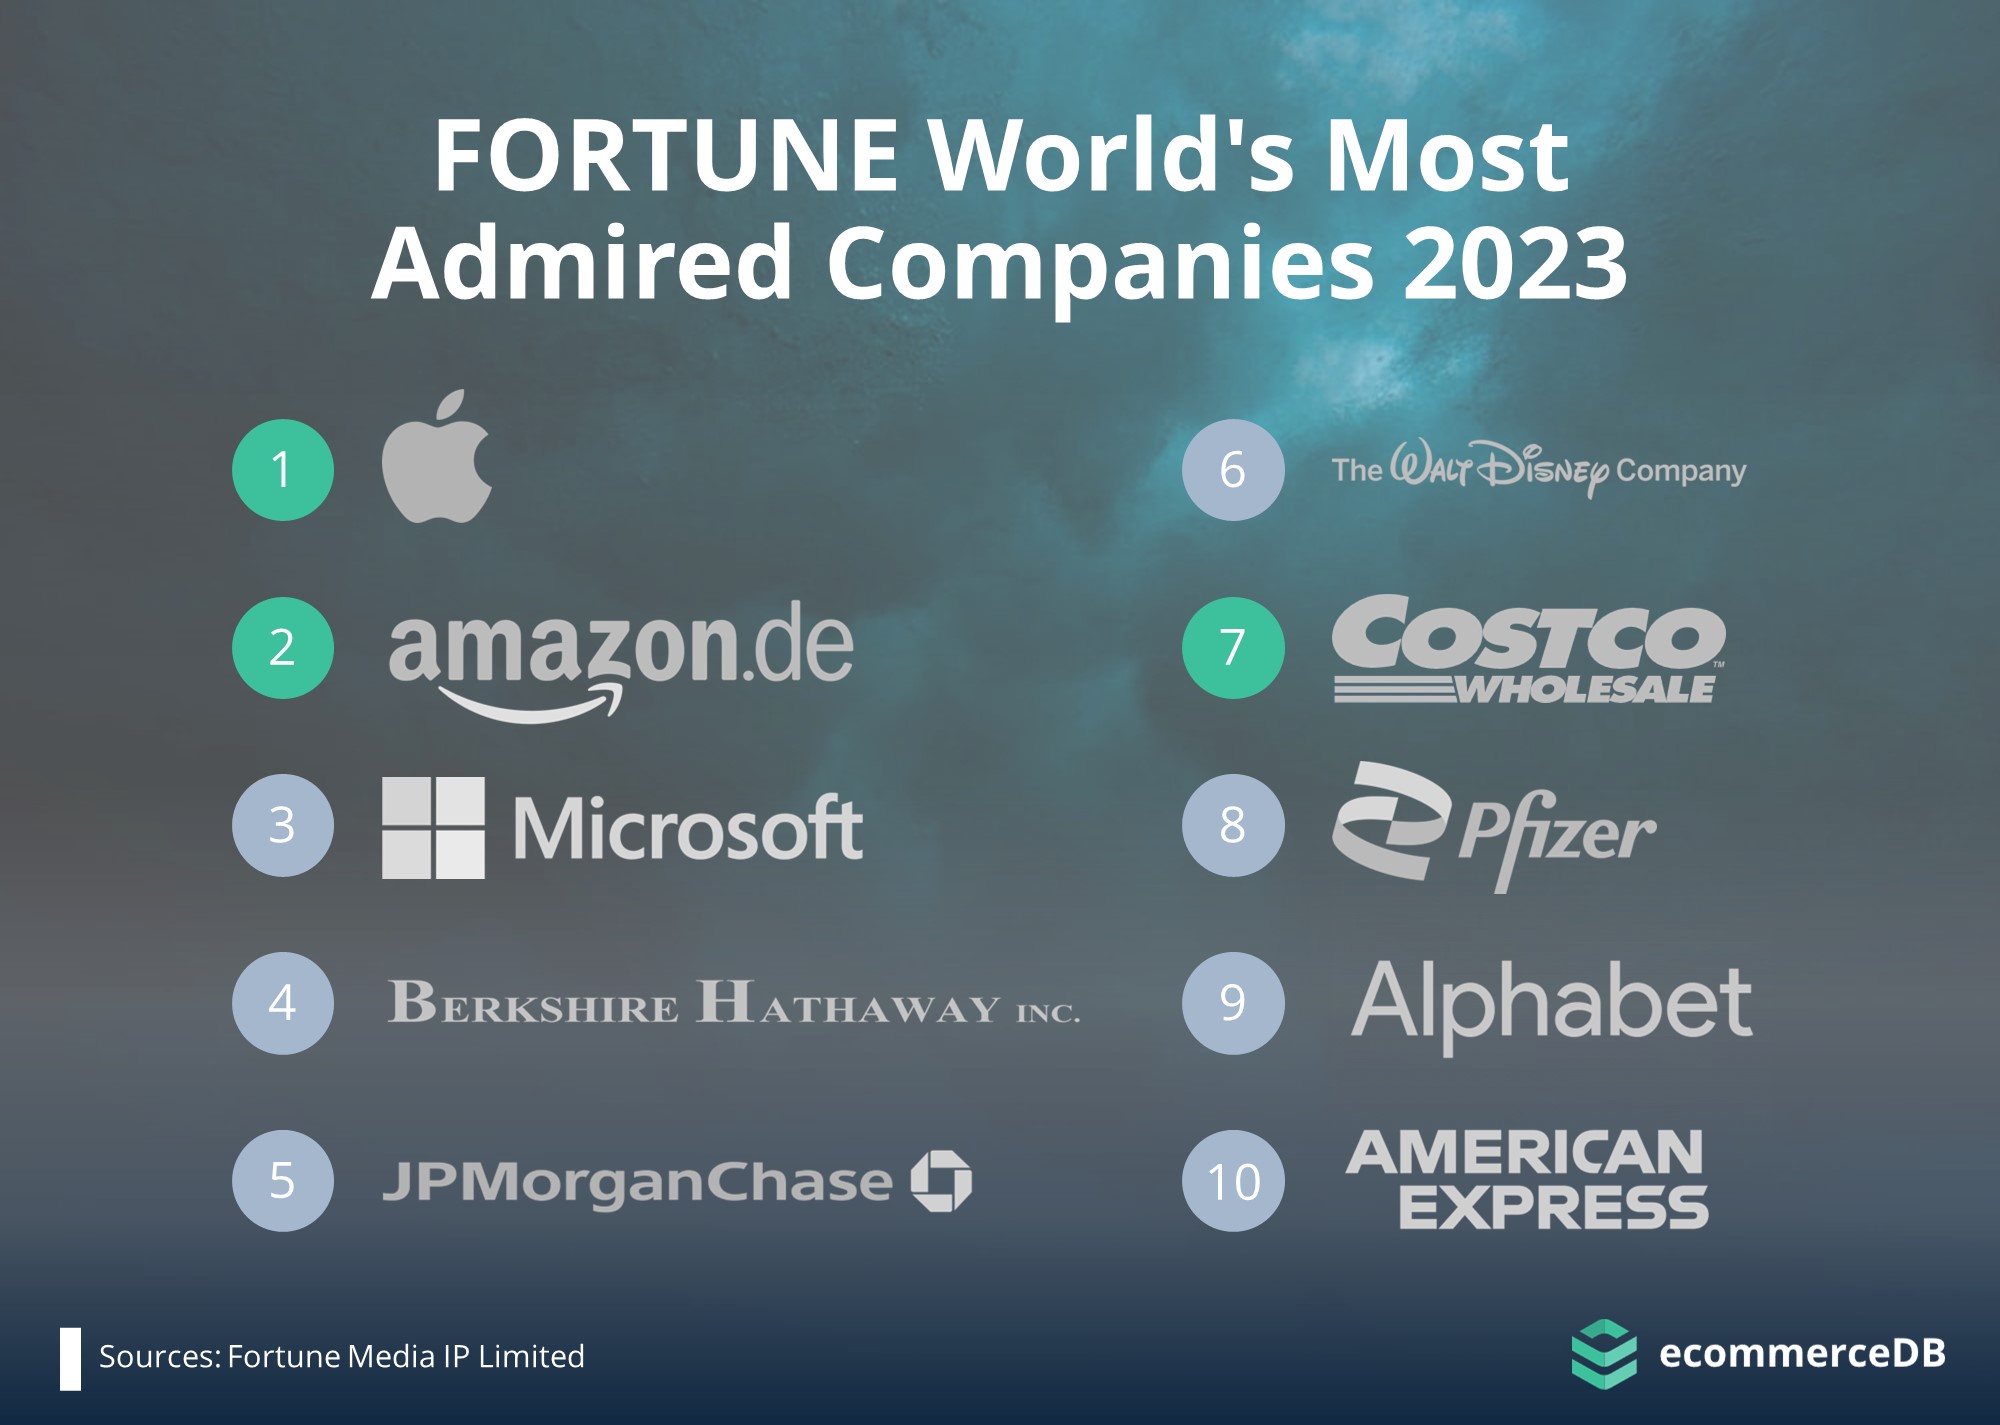 World’s Most Admired Companies List by Fortune Includes 3 Companies